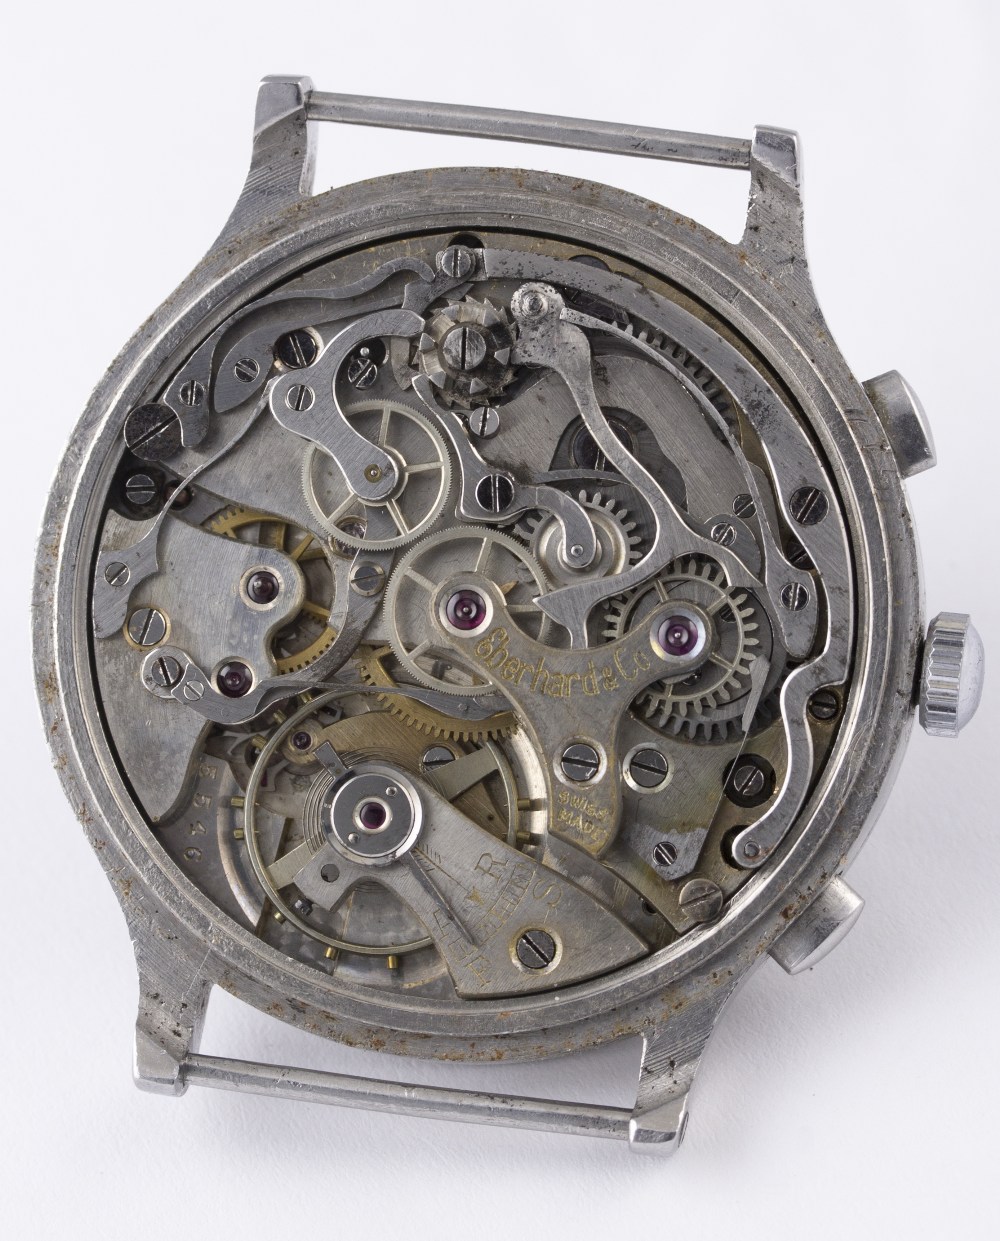 A RARE GENTLEMAN'S STAINLESS STEEL EBERHARD & CO CHRONOGRAPH WRIST WATCH CIRCA 1930s, REF. 7197
D: - Image 5 of 8